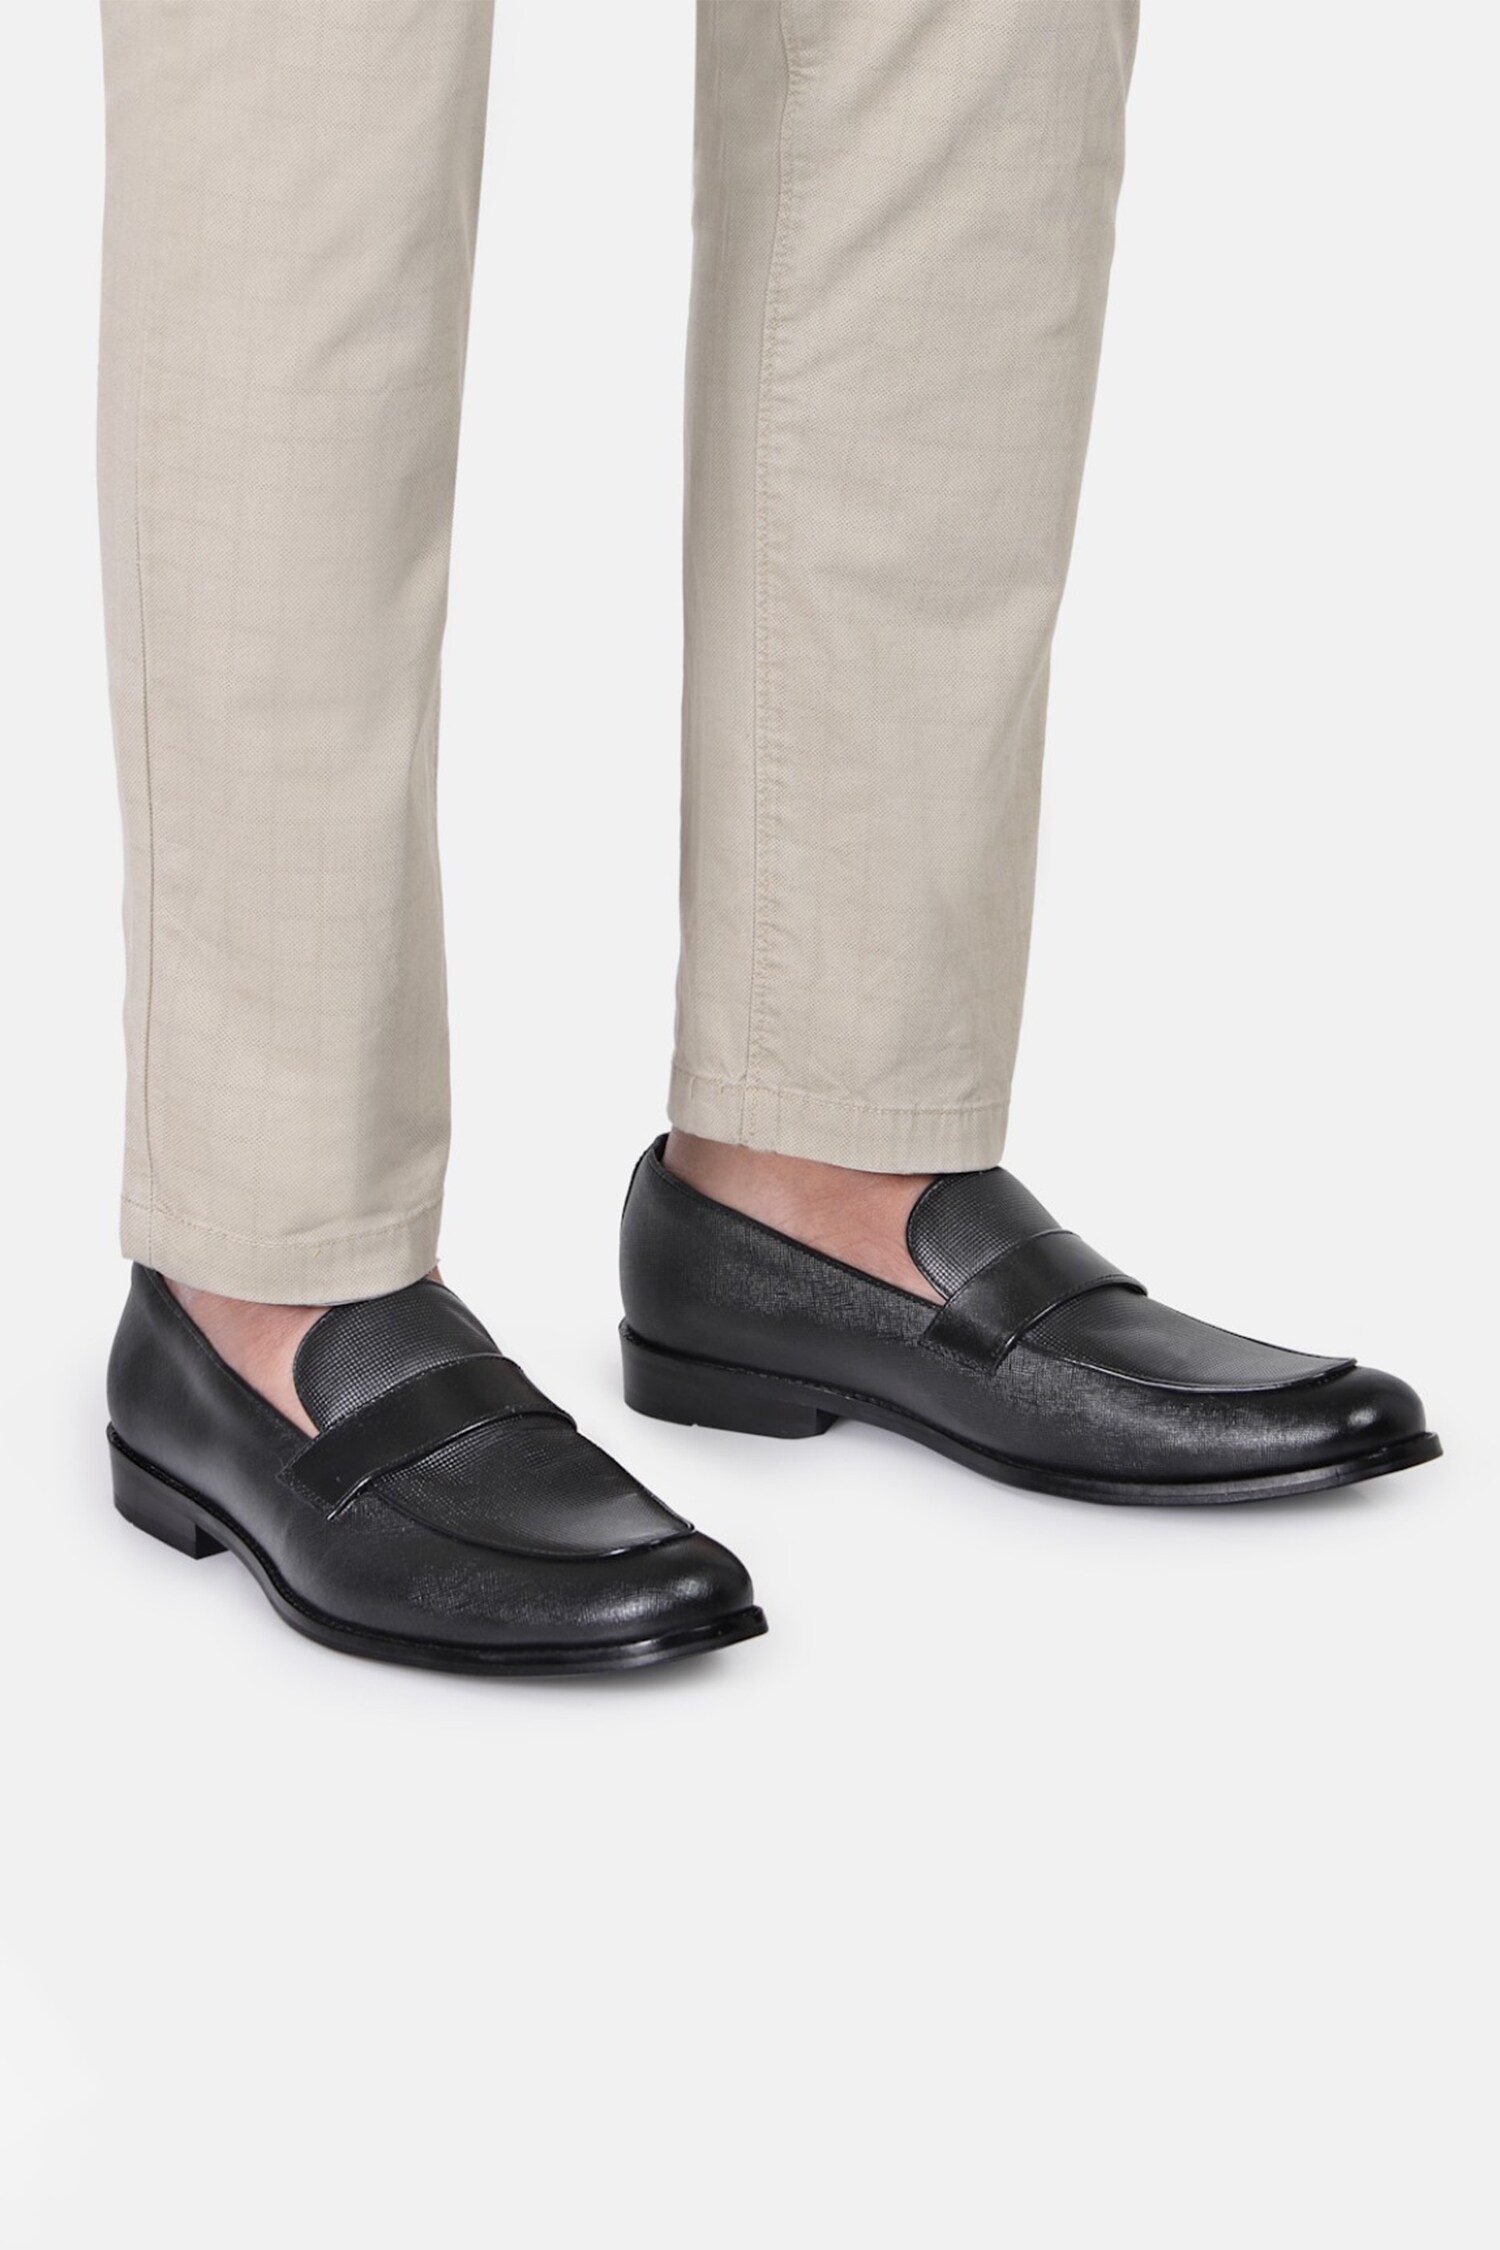 Buy Black Genuine Leather Round Toe Penny Loafers For Men By Hats Off